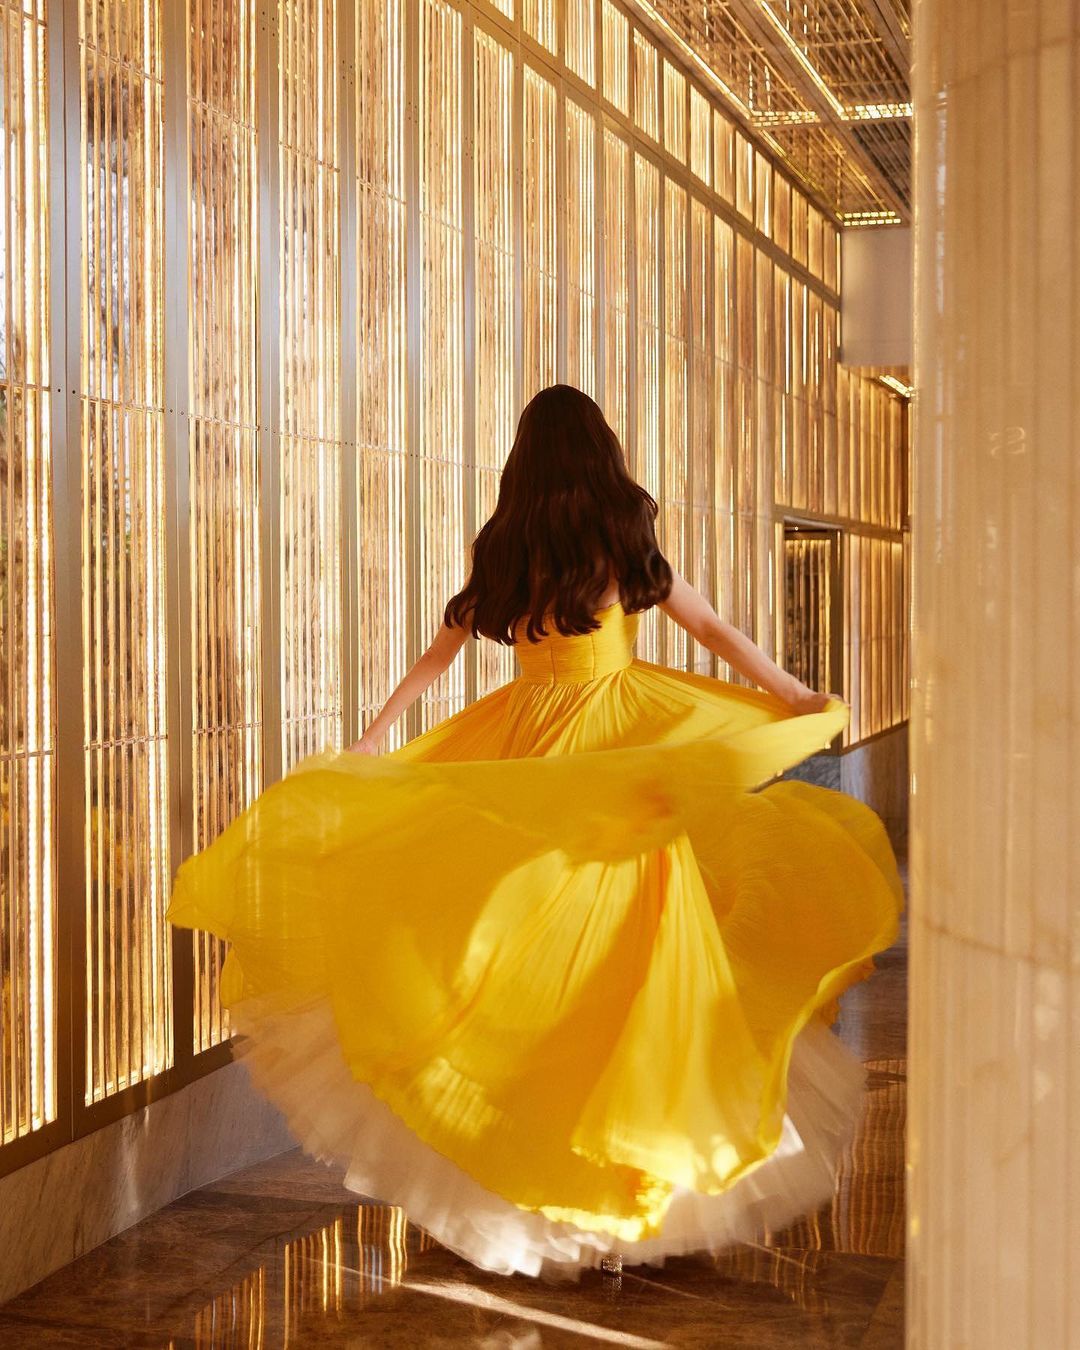 Jessica Jung, wearing a dazzling yellow dress and smiling... sexy + elegant